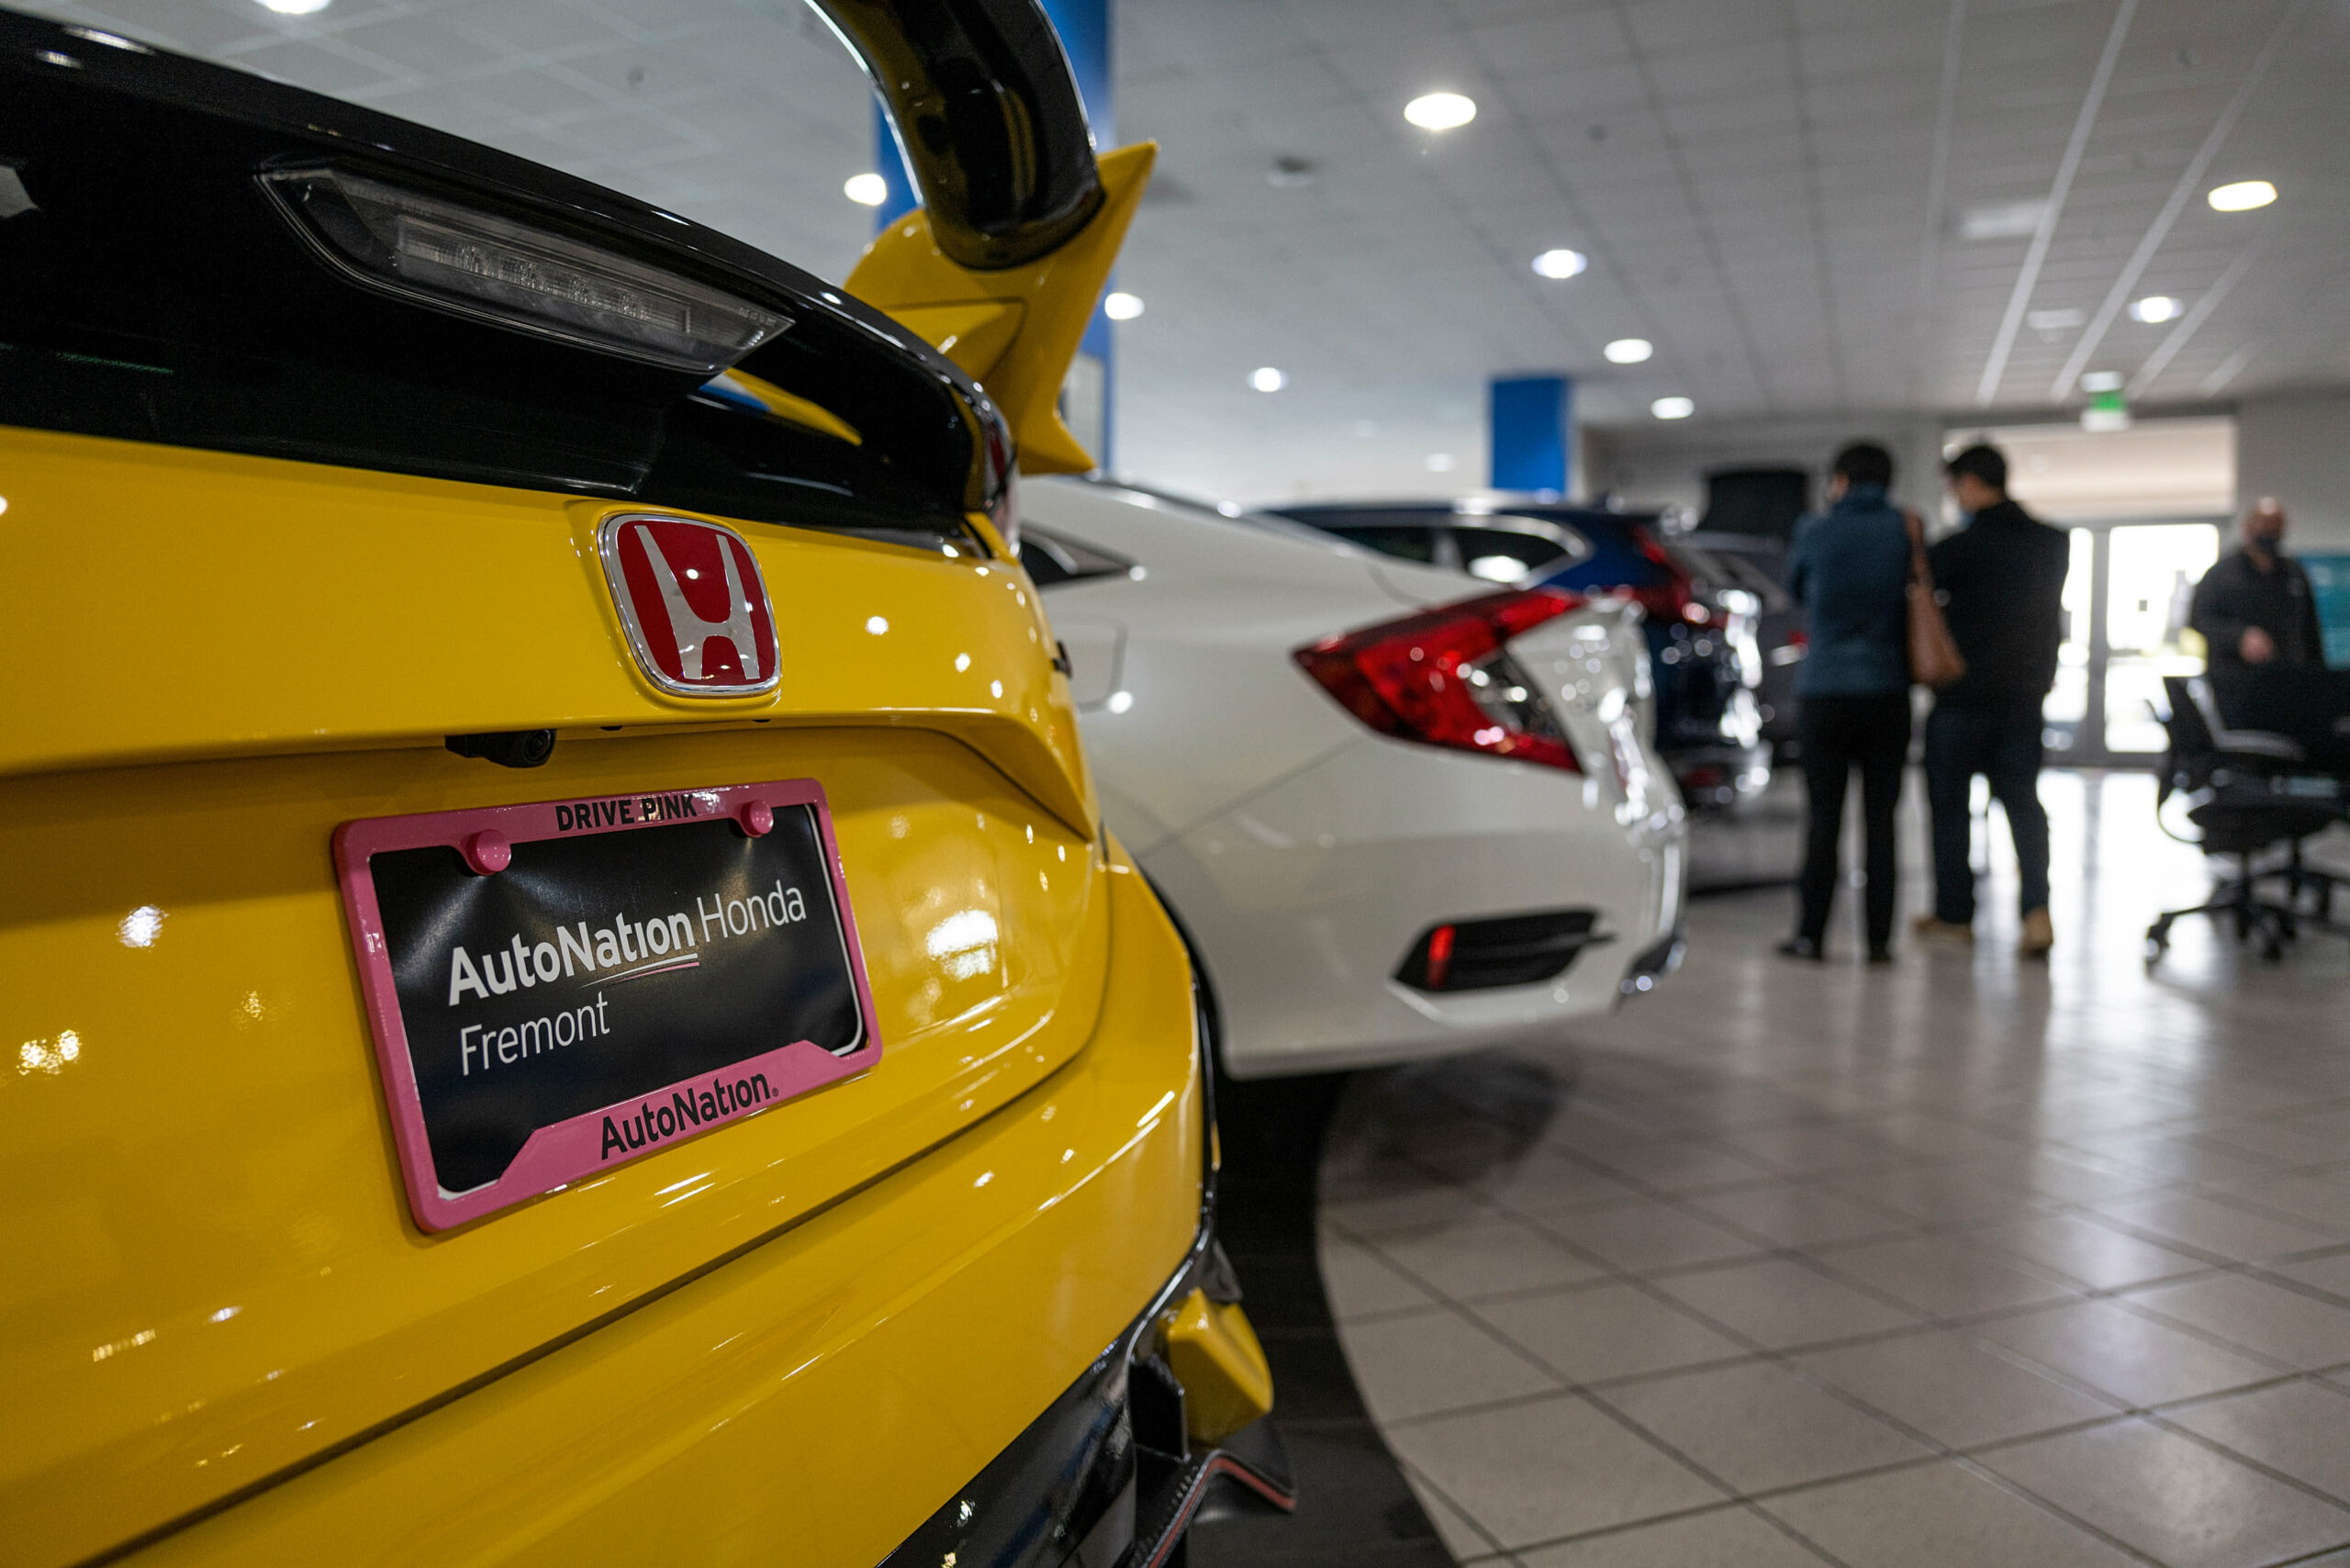 AutoNation shares hit new all-time high after reporting record quarterly earnings